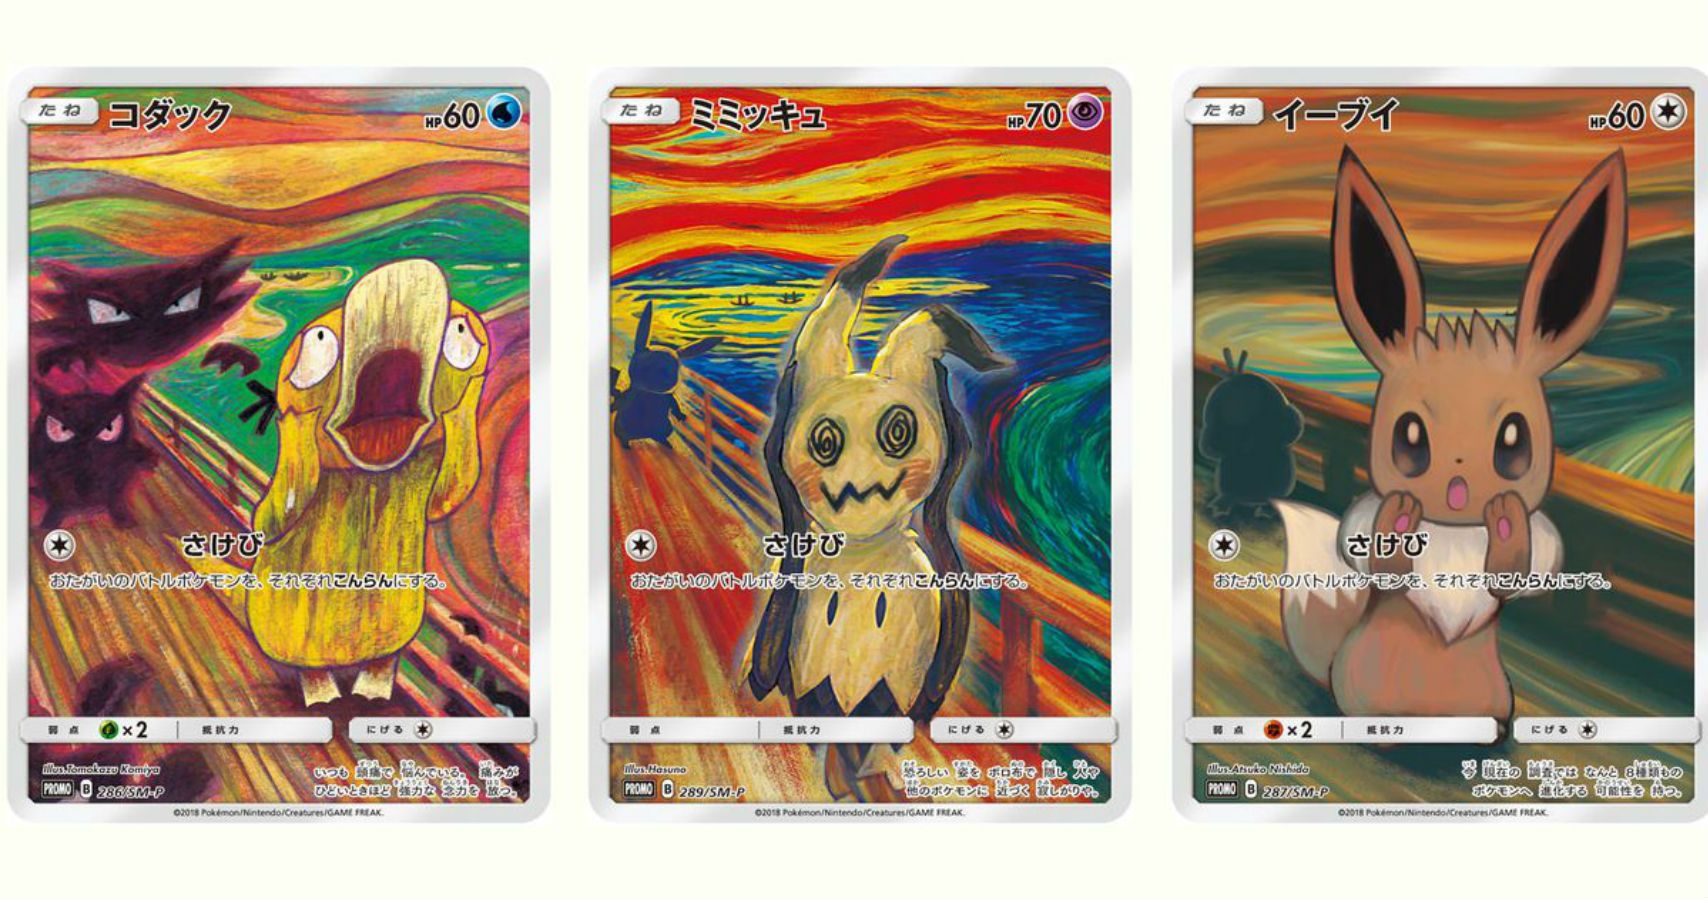 Pokémon Cards Inspired By Famous Painting The Scream Are Coming